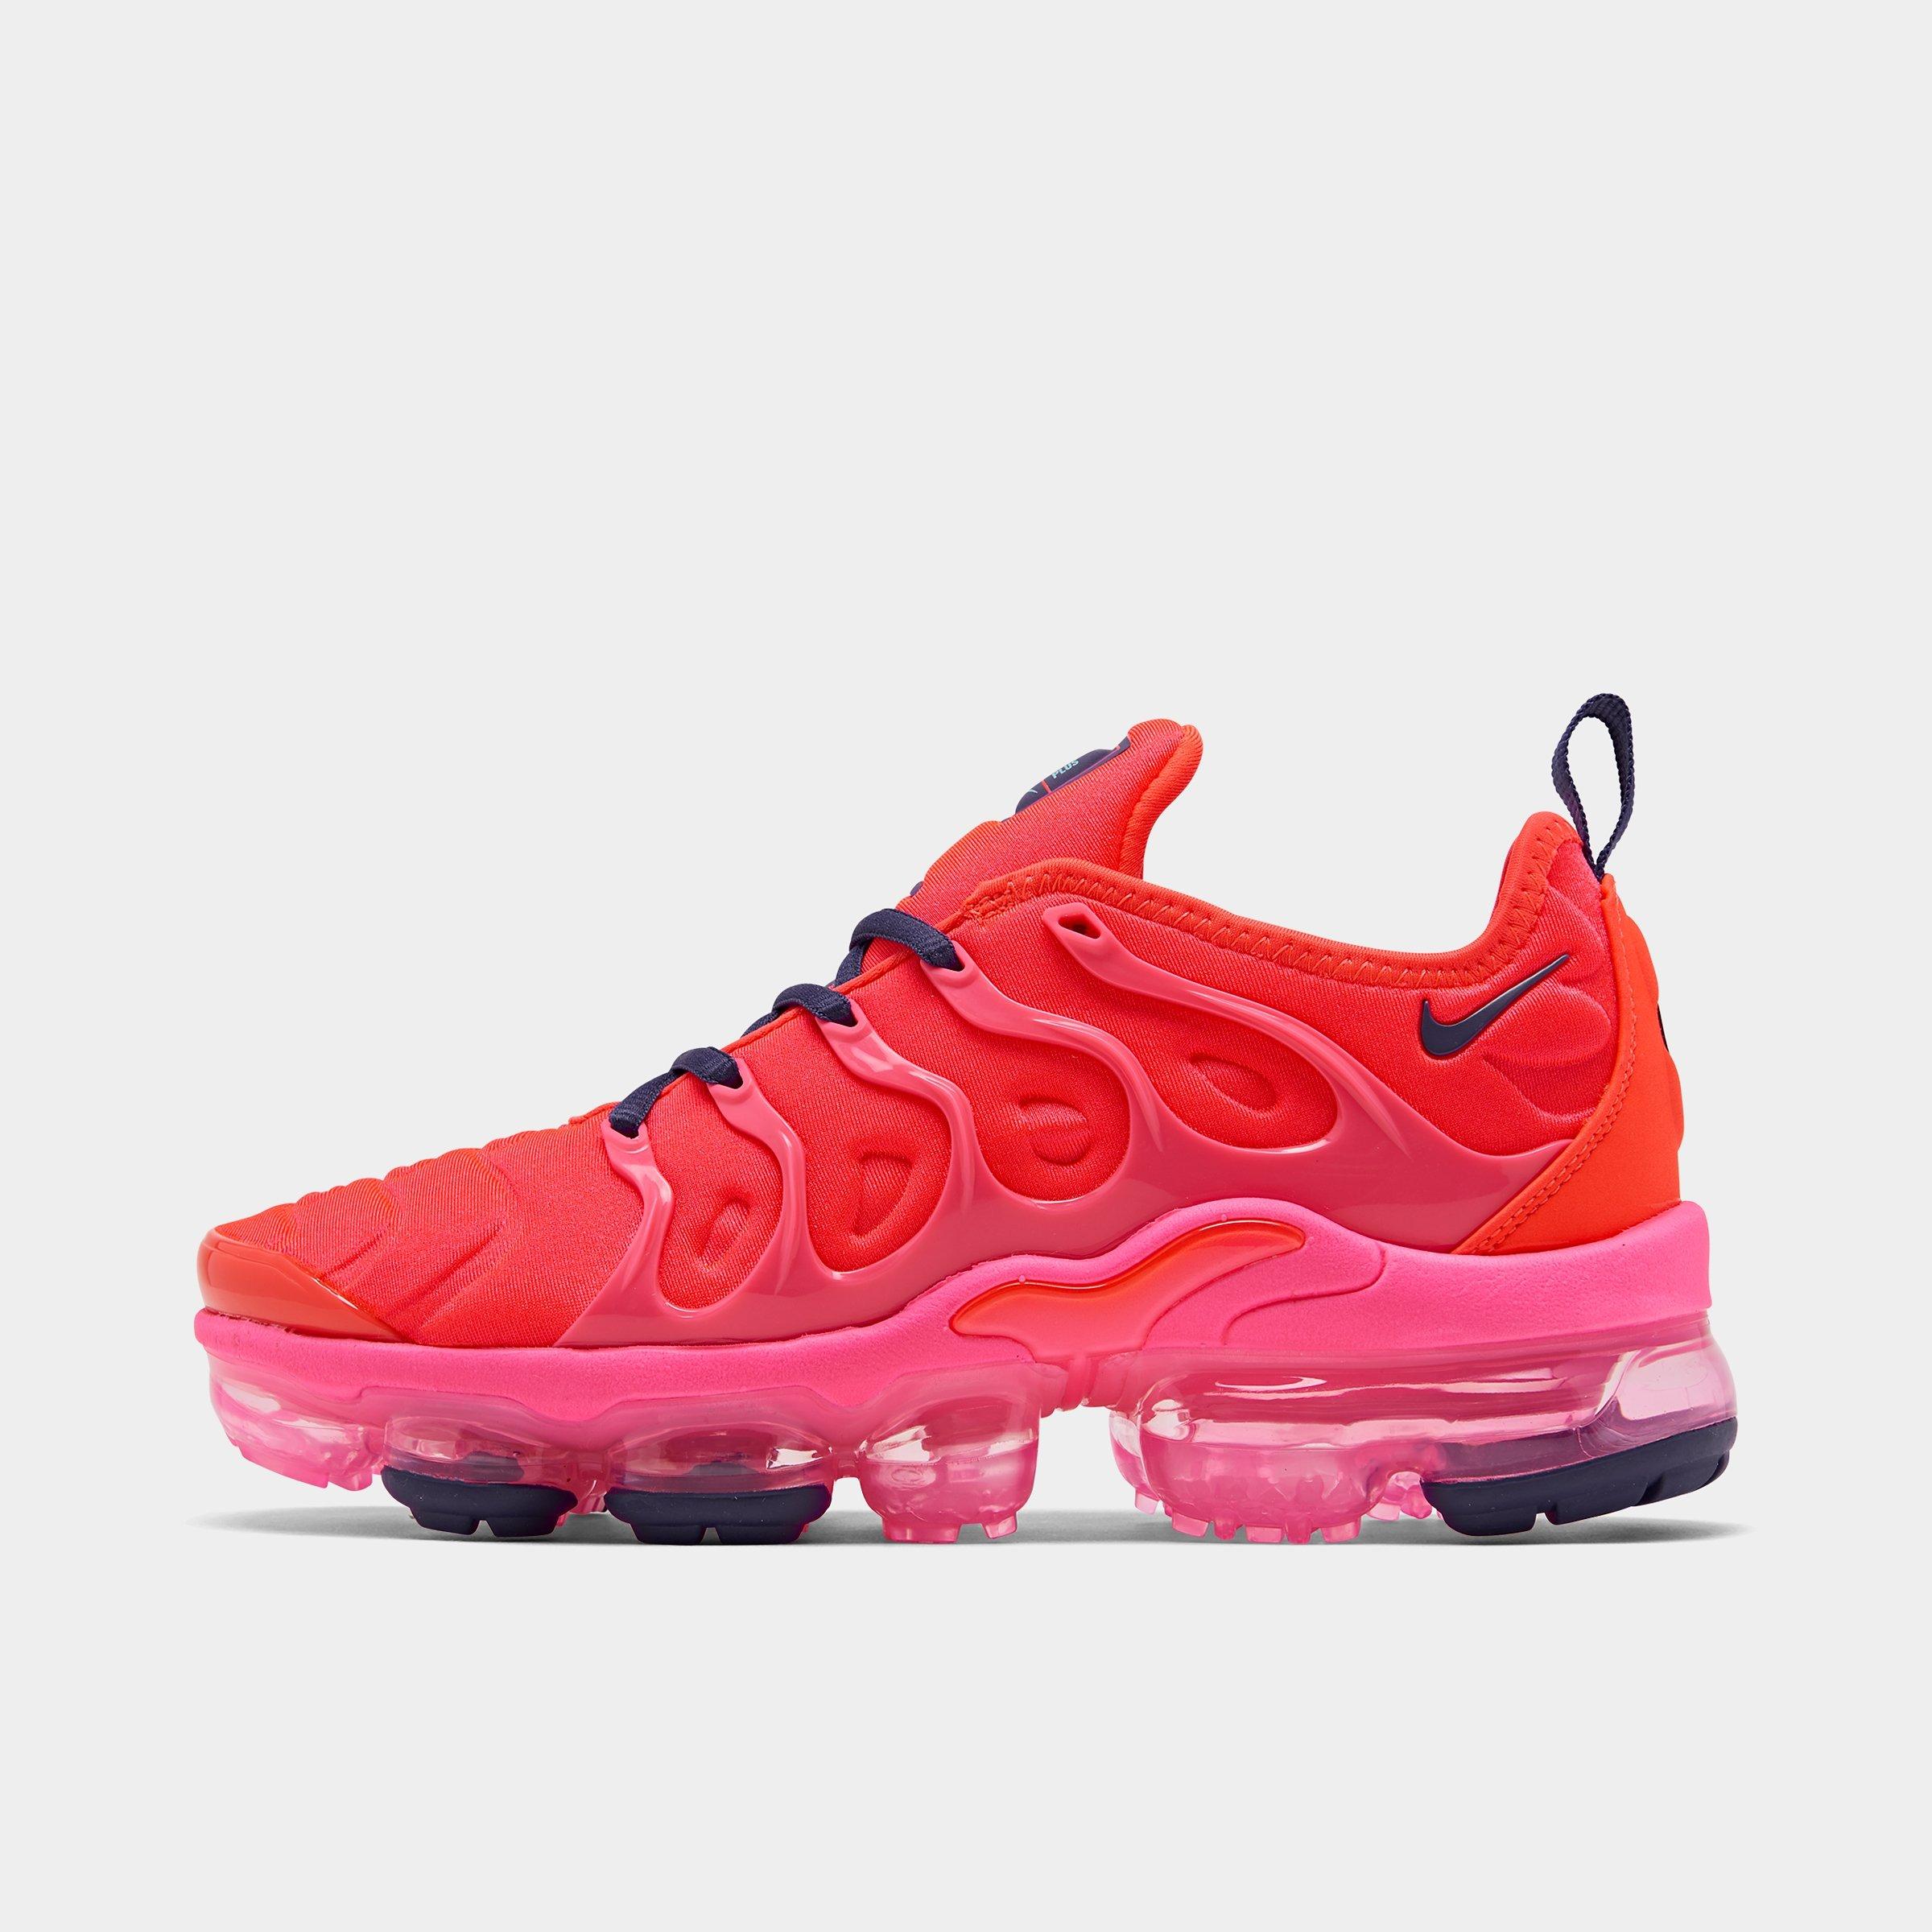 Nike Air Vapormax Plus Sunset With images Nike air Nike